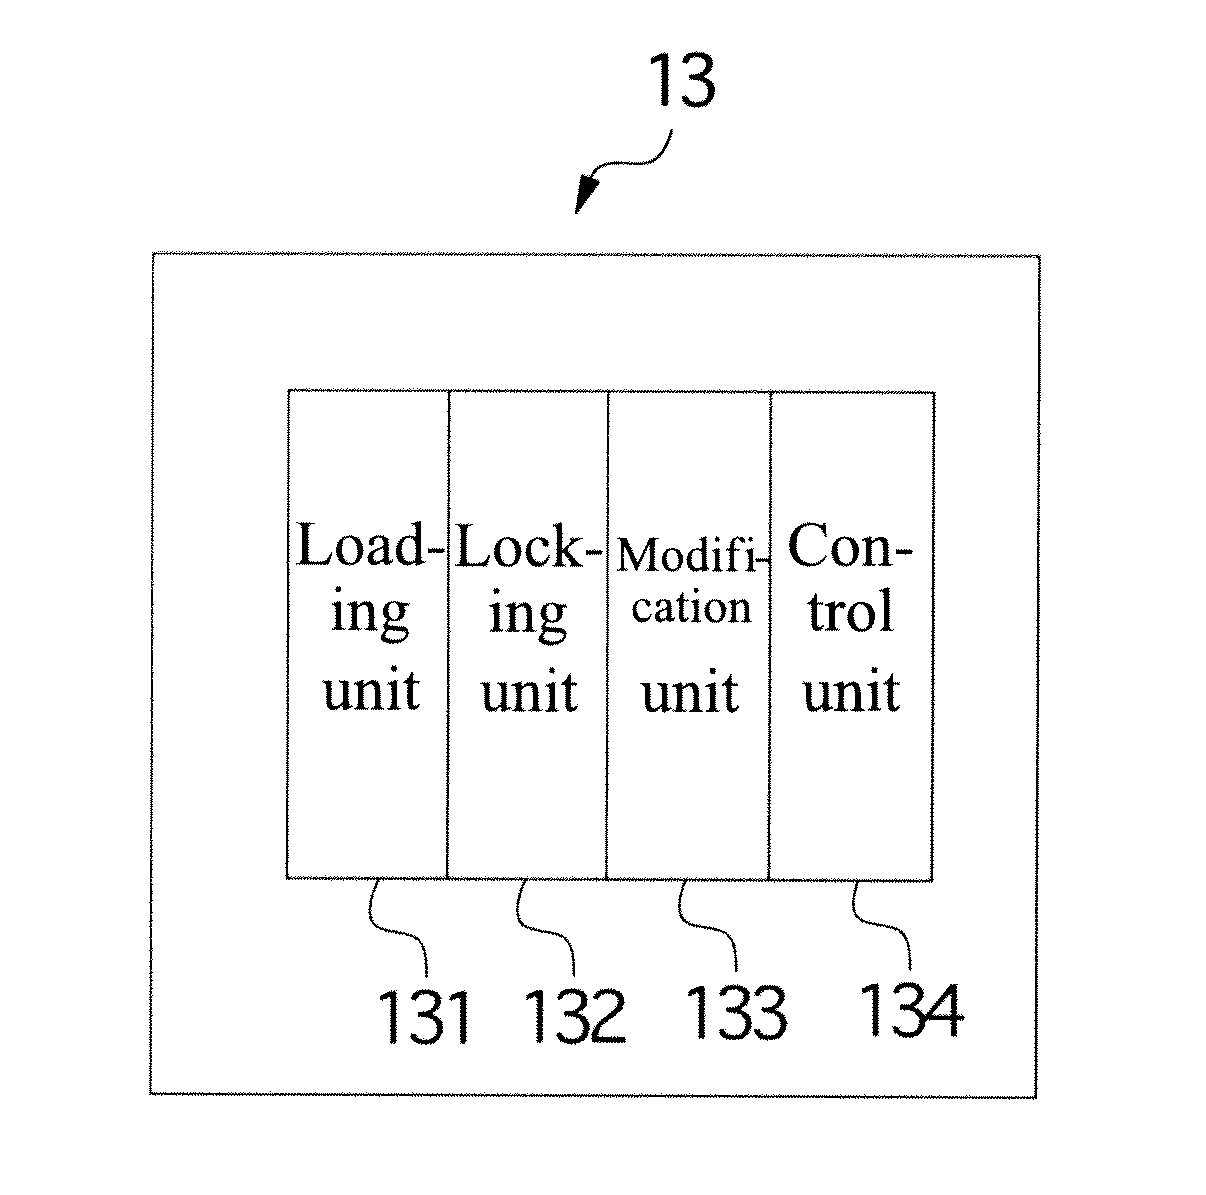 System and method for data replication between heterogeneous databases